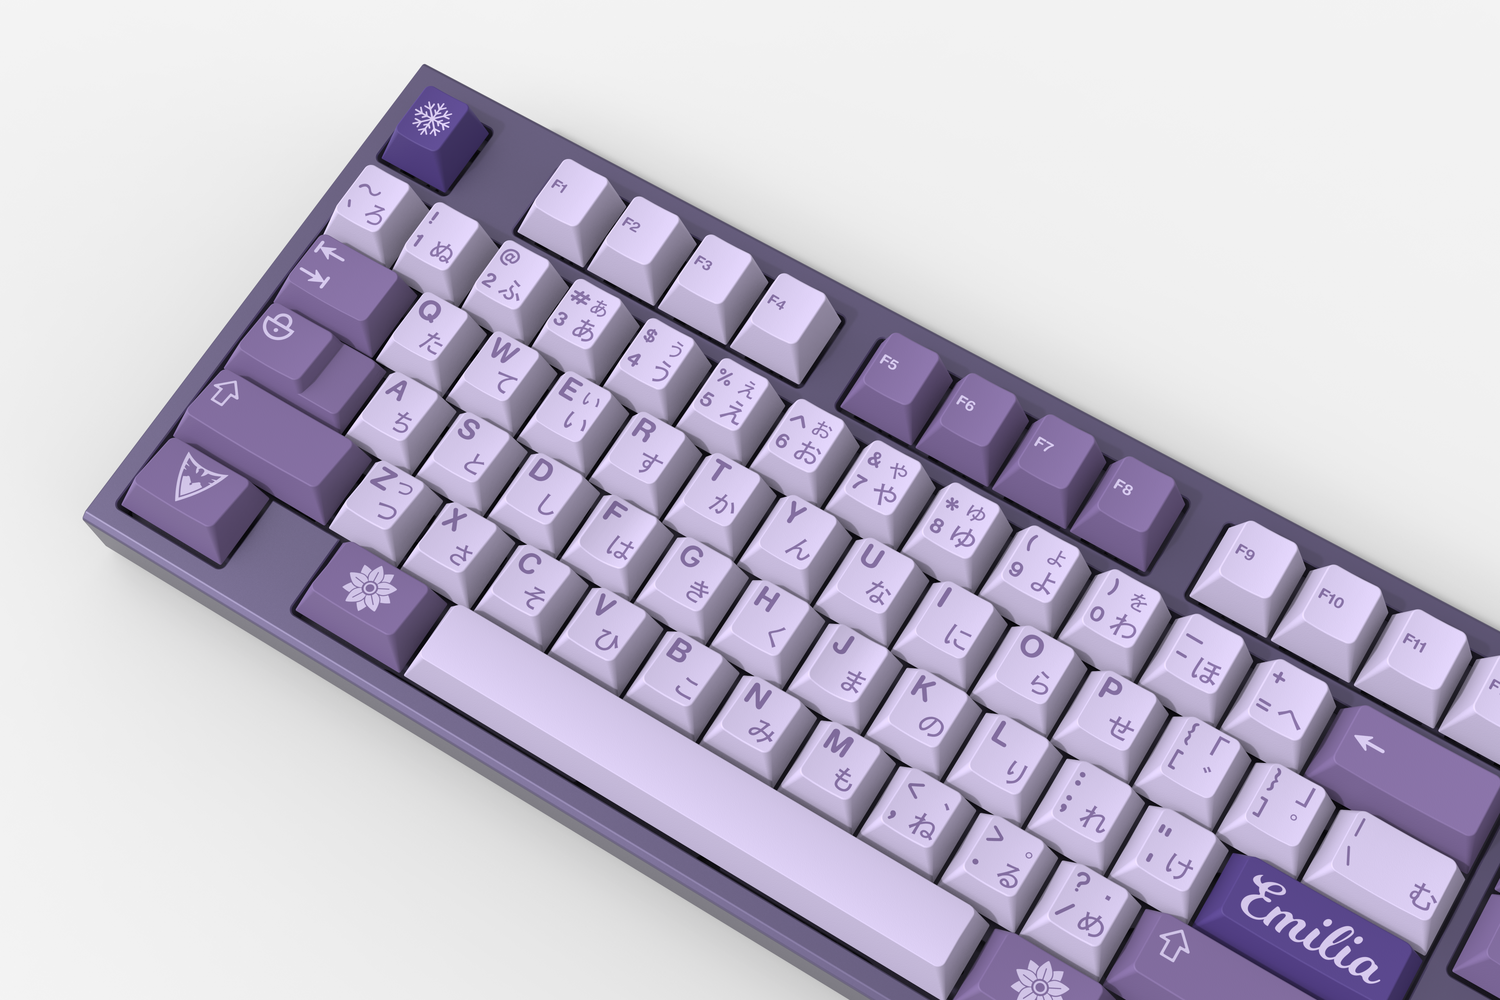 [En Route] GMK Frost Witch 2